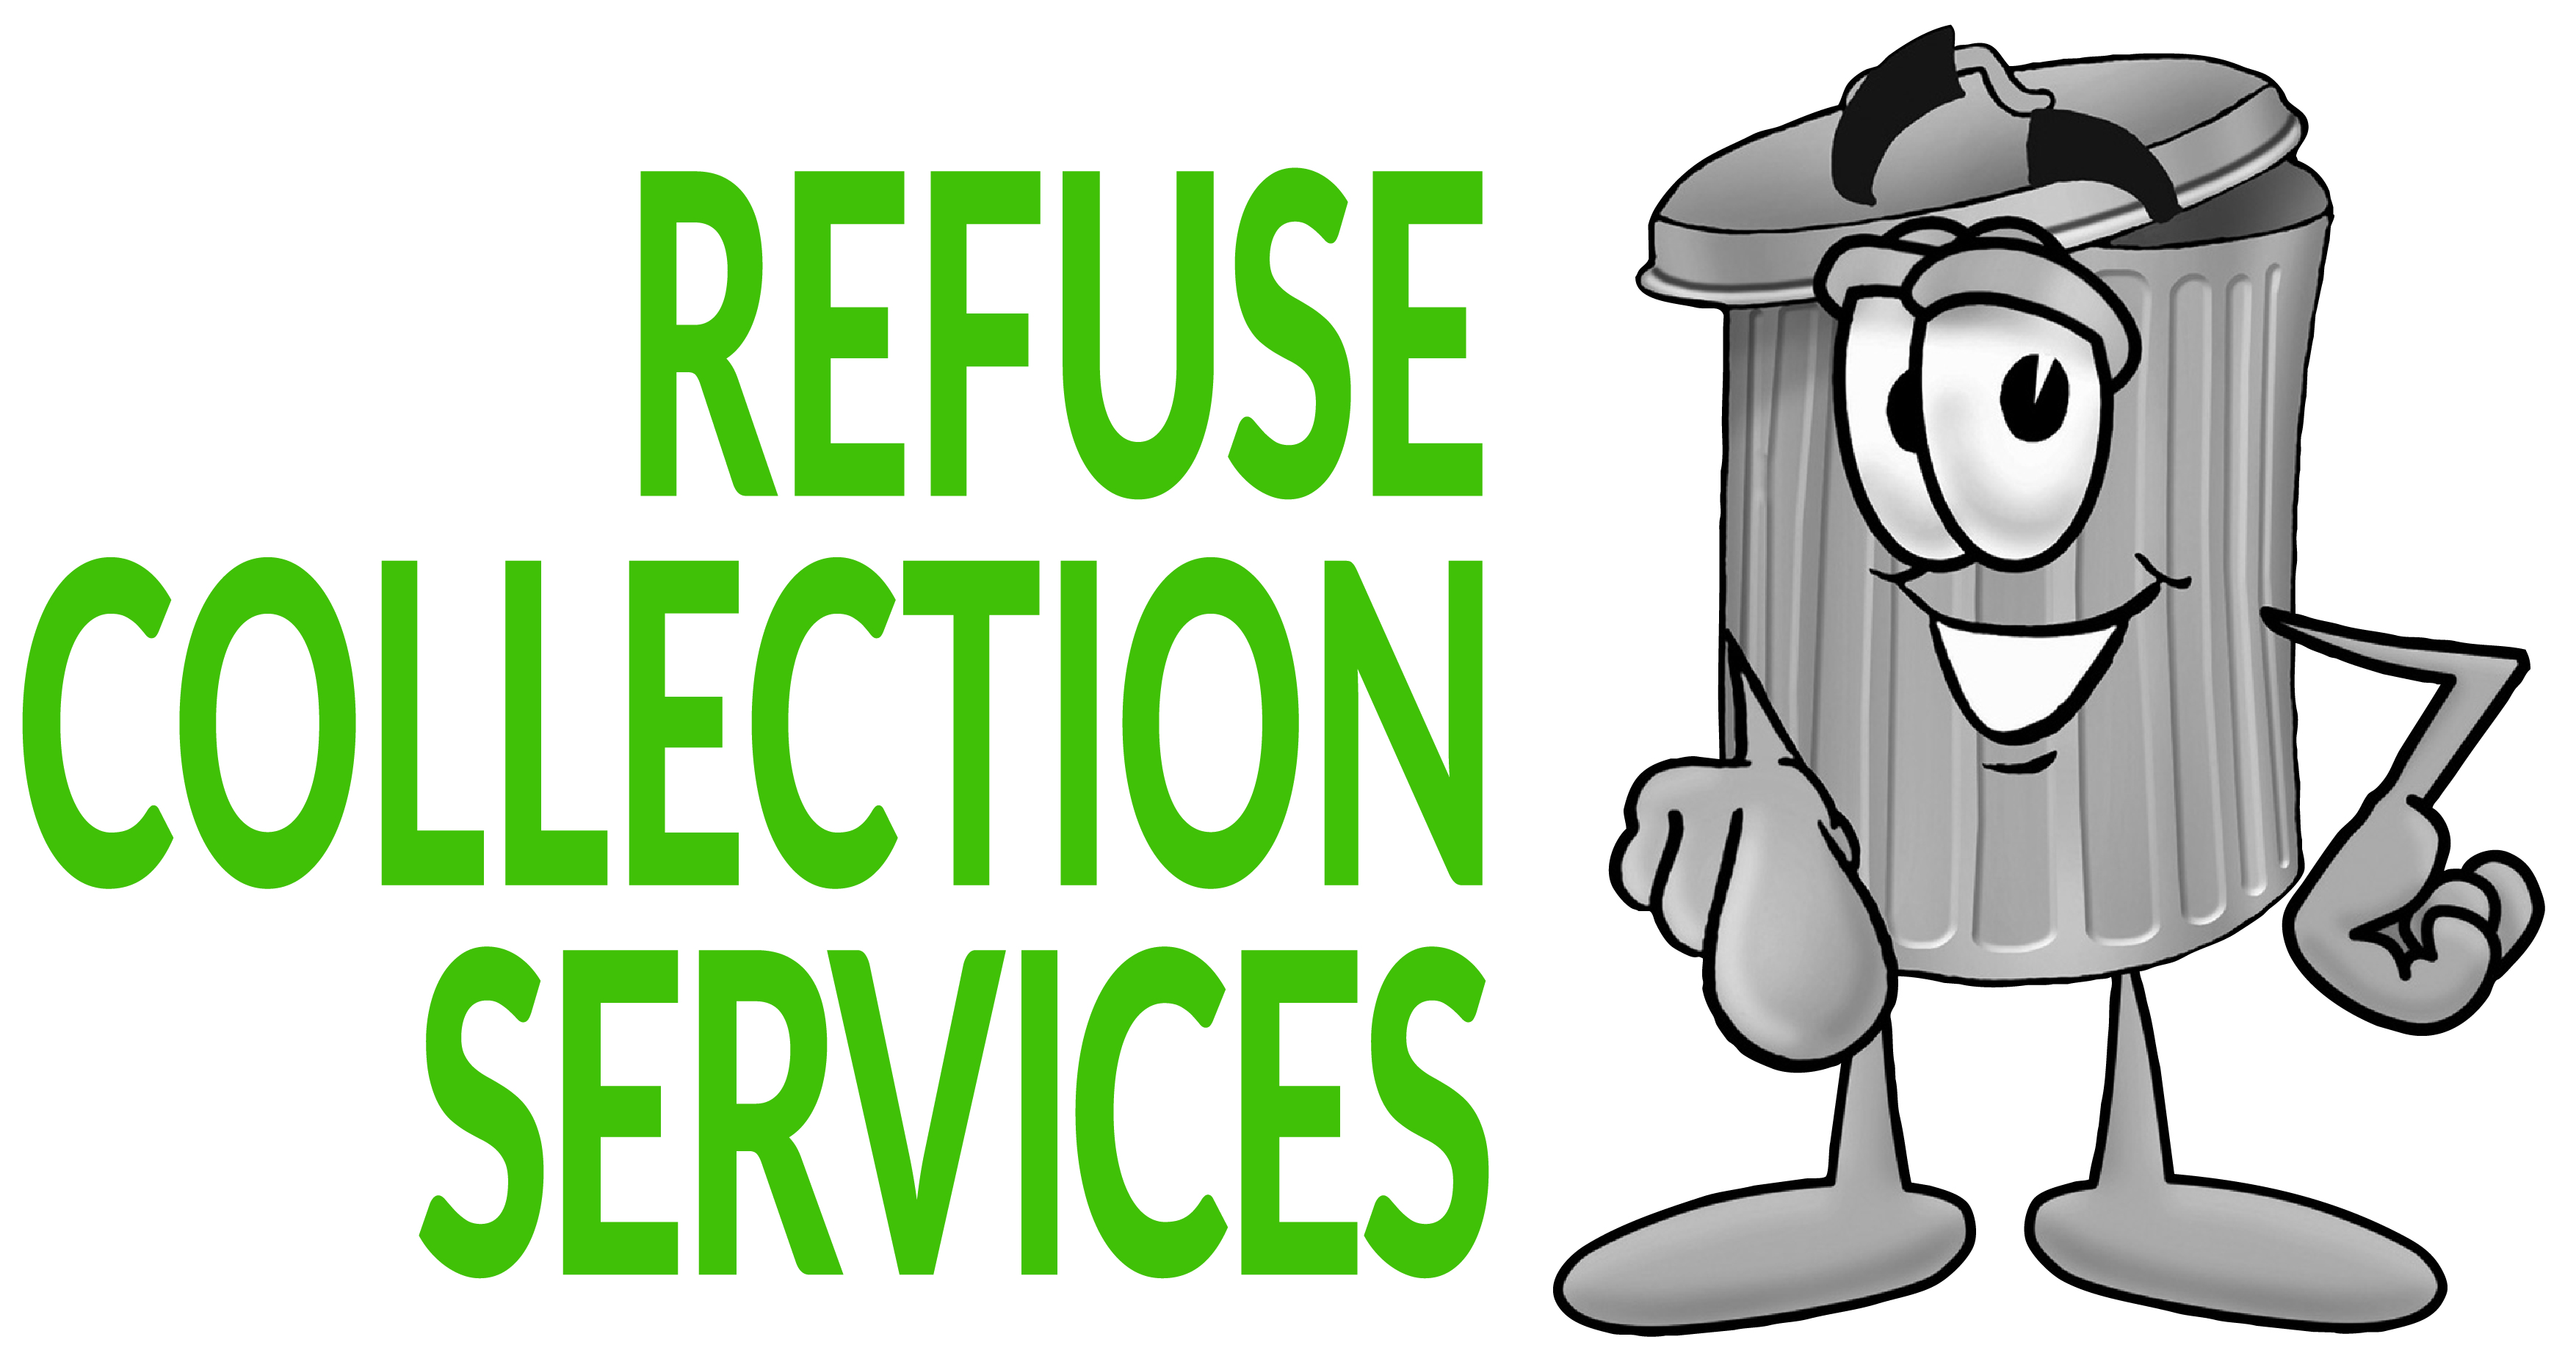 Refuse Collection Services